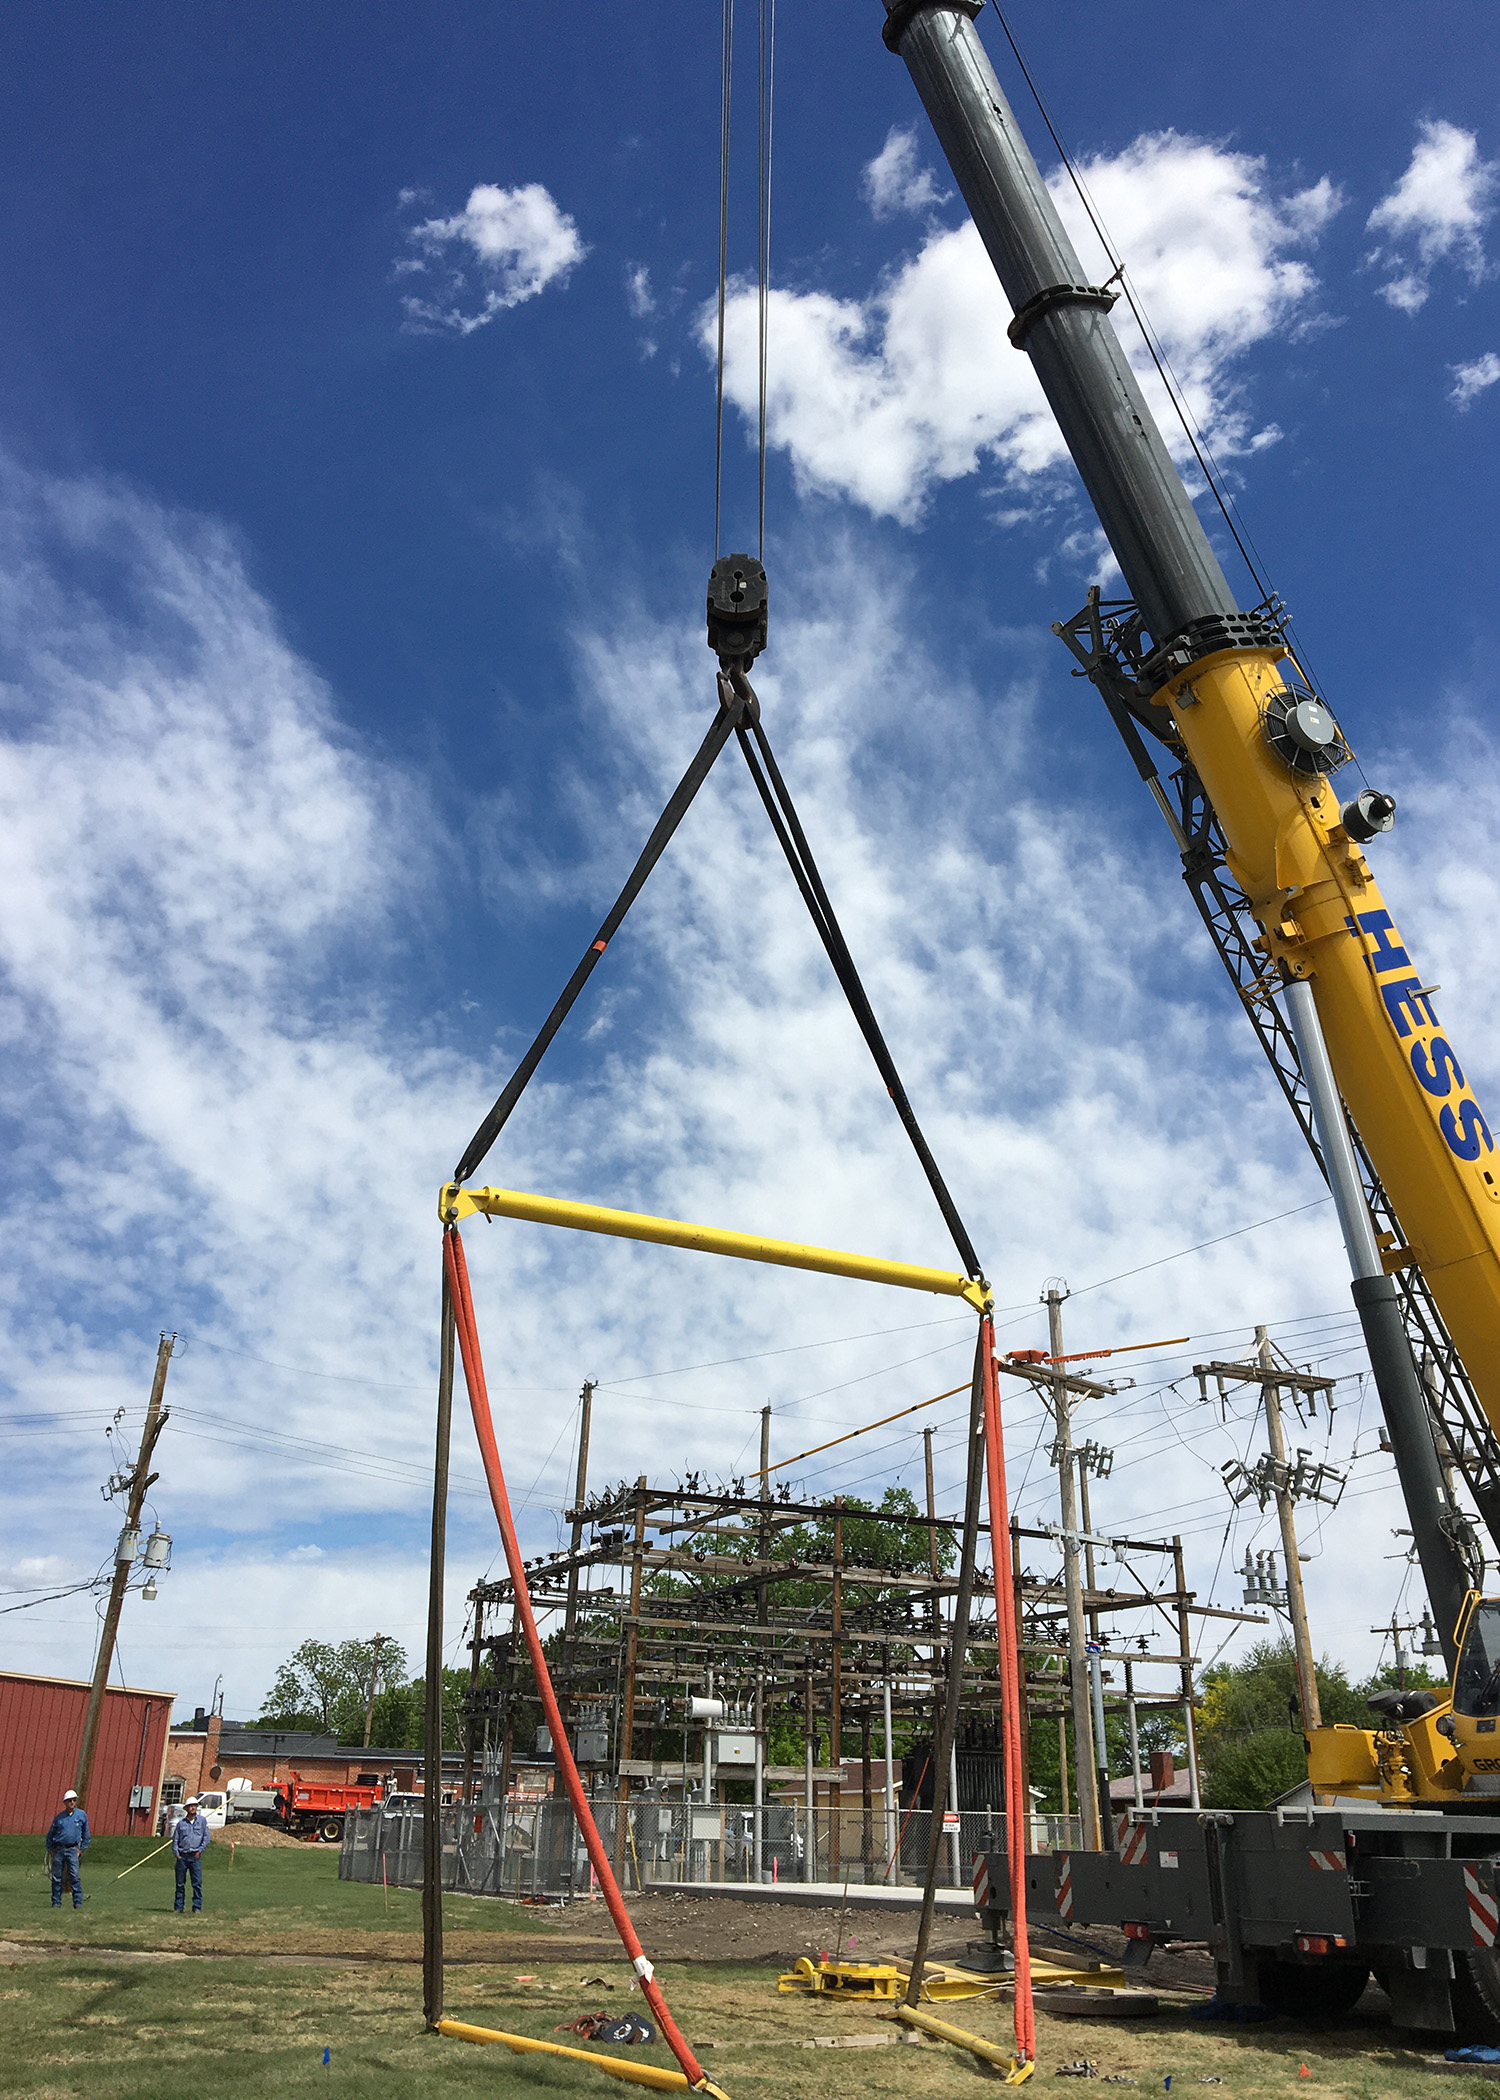 A very large crane from Hess Services is rigged with yellow harnesses to hoist a skid-mounted substation onto a concrete pad.